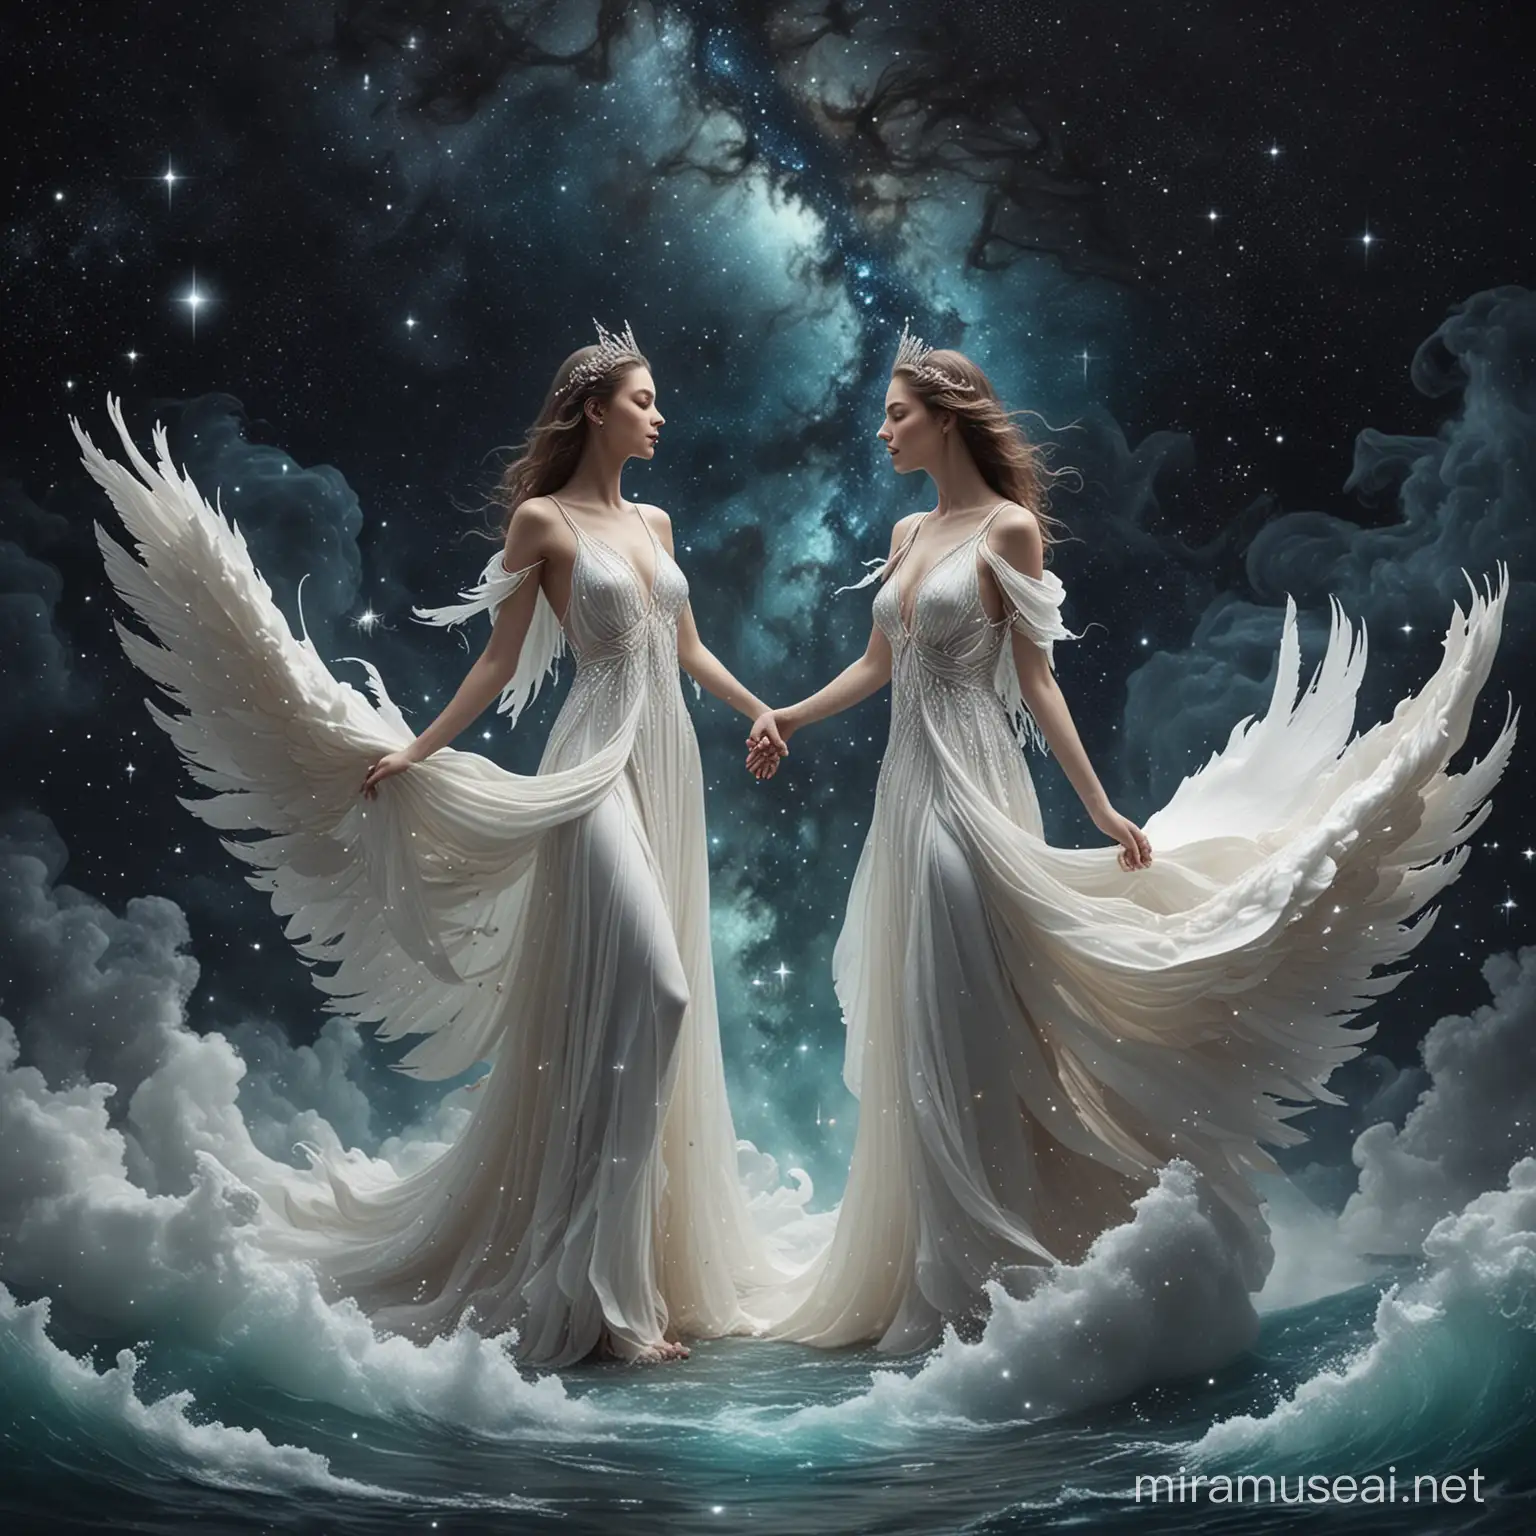 create a fashion portfolio front page which shows a realm universe where galaxies danced and stars whispered ancient secrets, there dwelled six magnificent swans of extraordinary essence